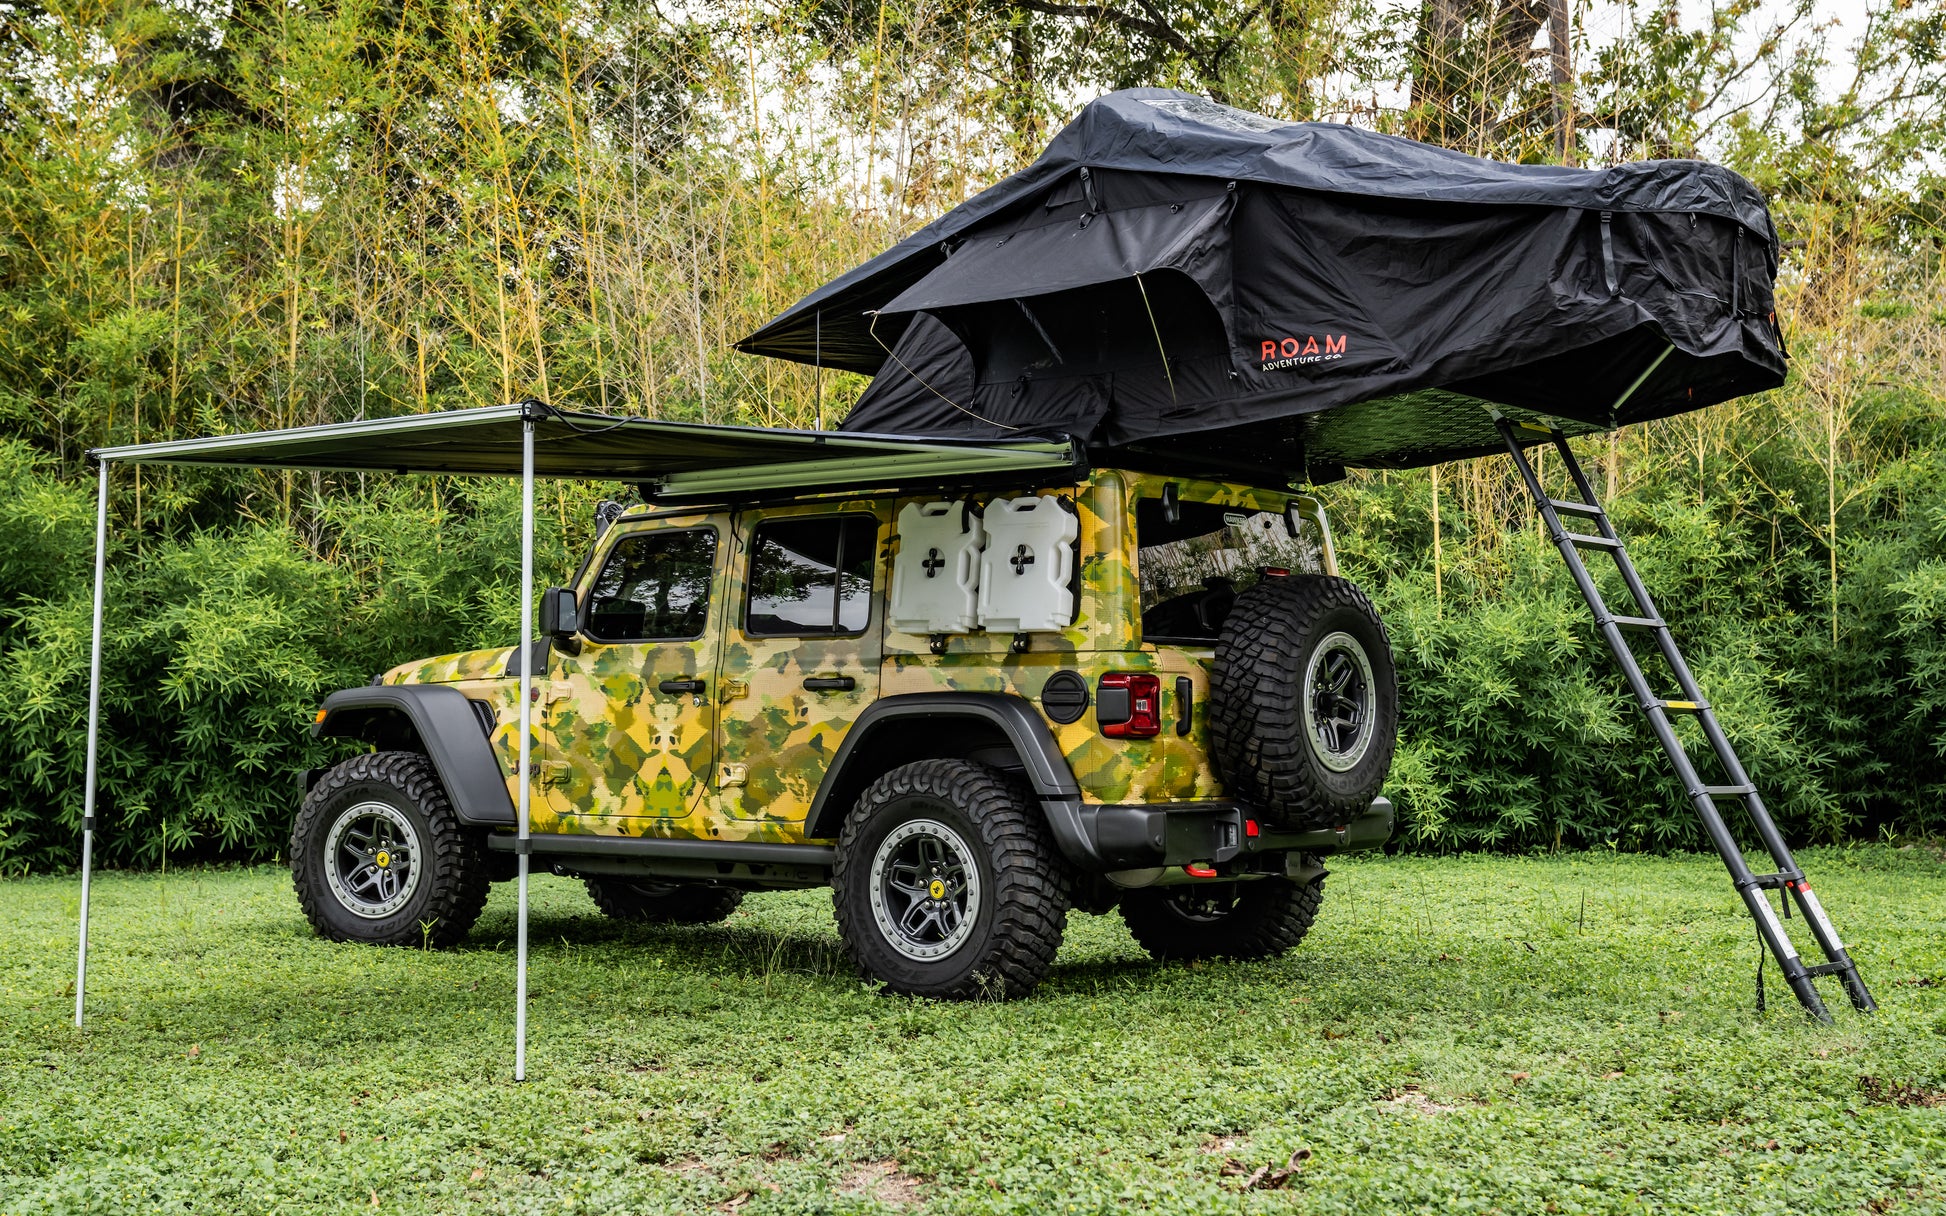 upgraded camo wrapped jeep wrangler rubicon for sale near san marcos new braunfels texas at hawkes outdoors 2102512882